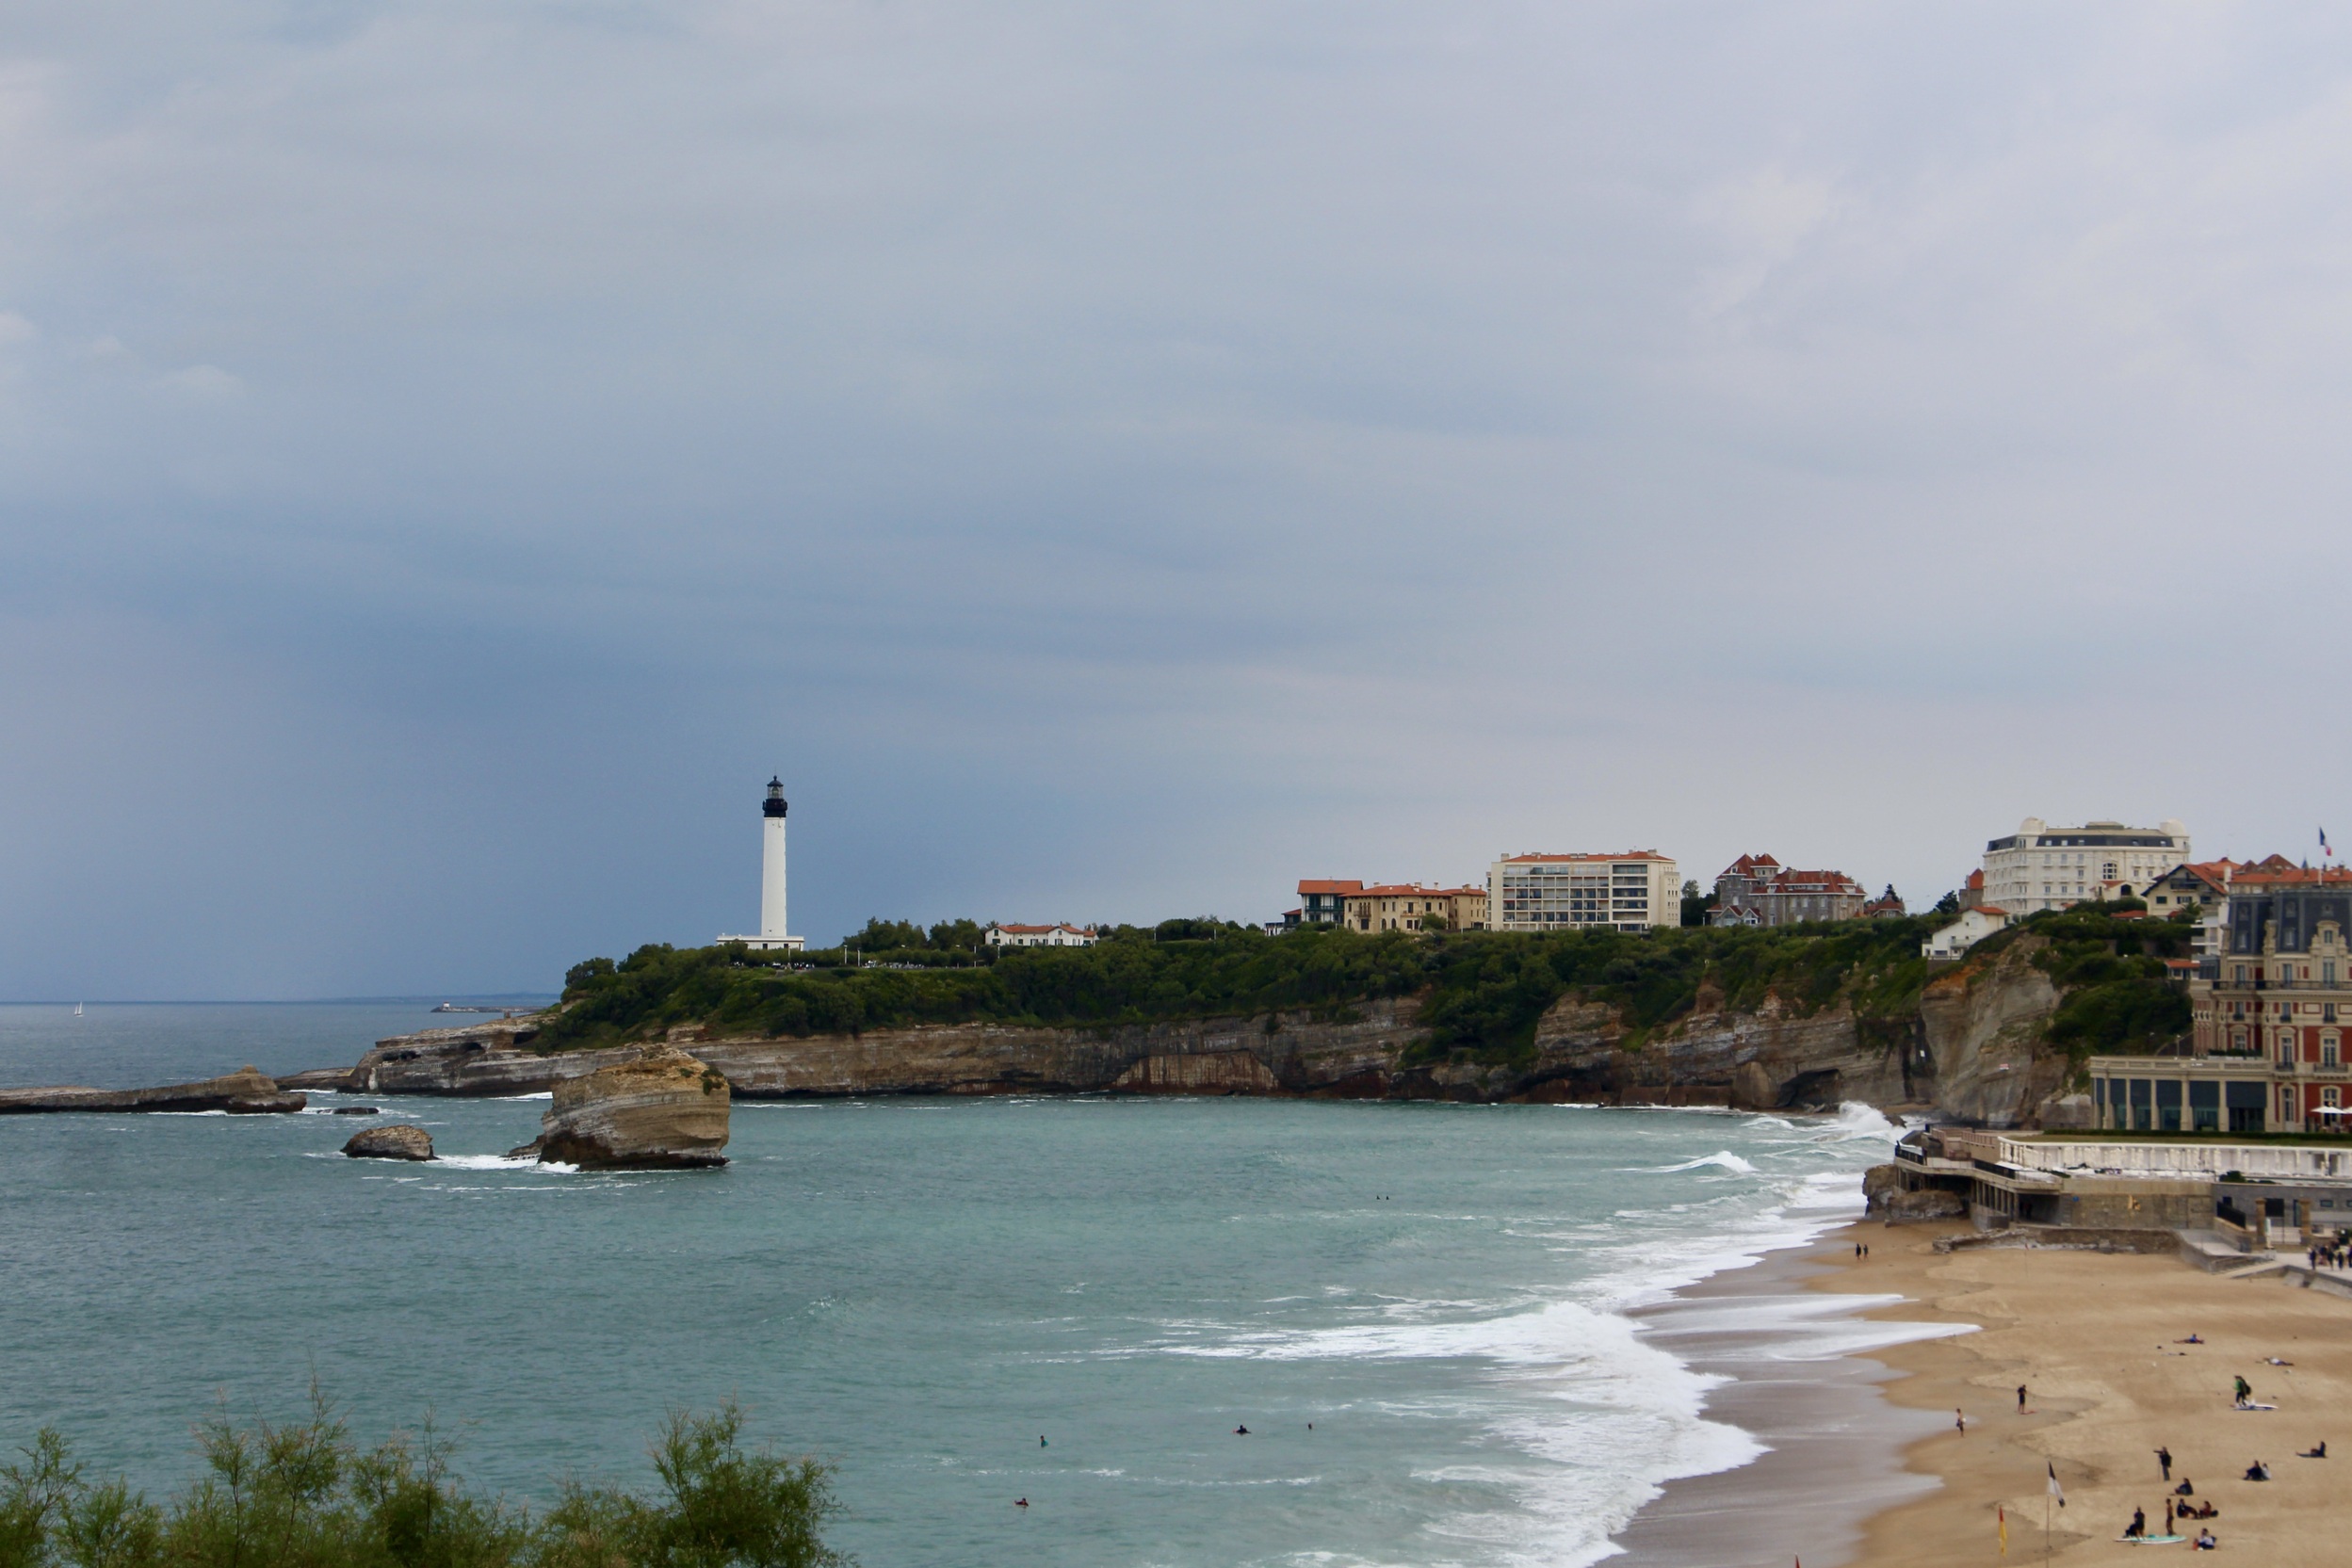 A view of the Grande Plage and the Phare in Biarritz, France.